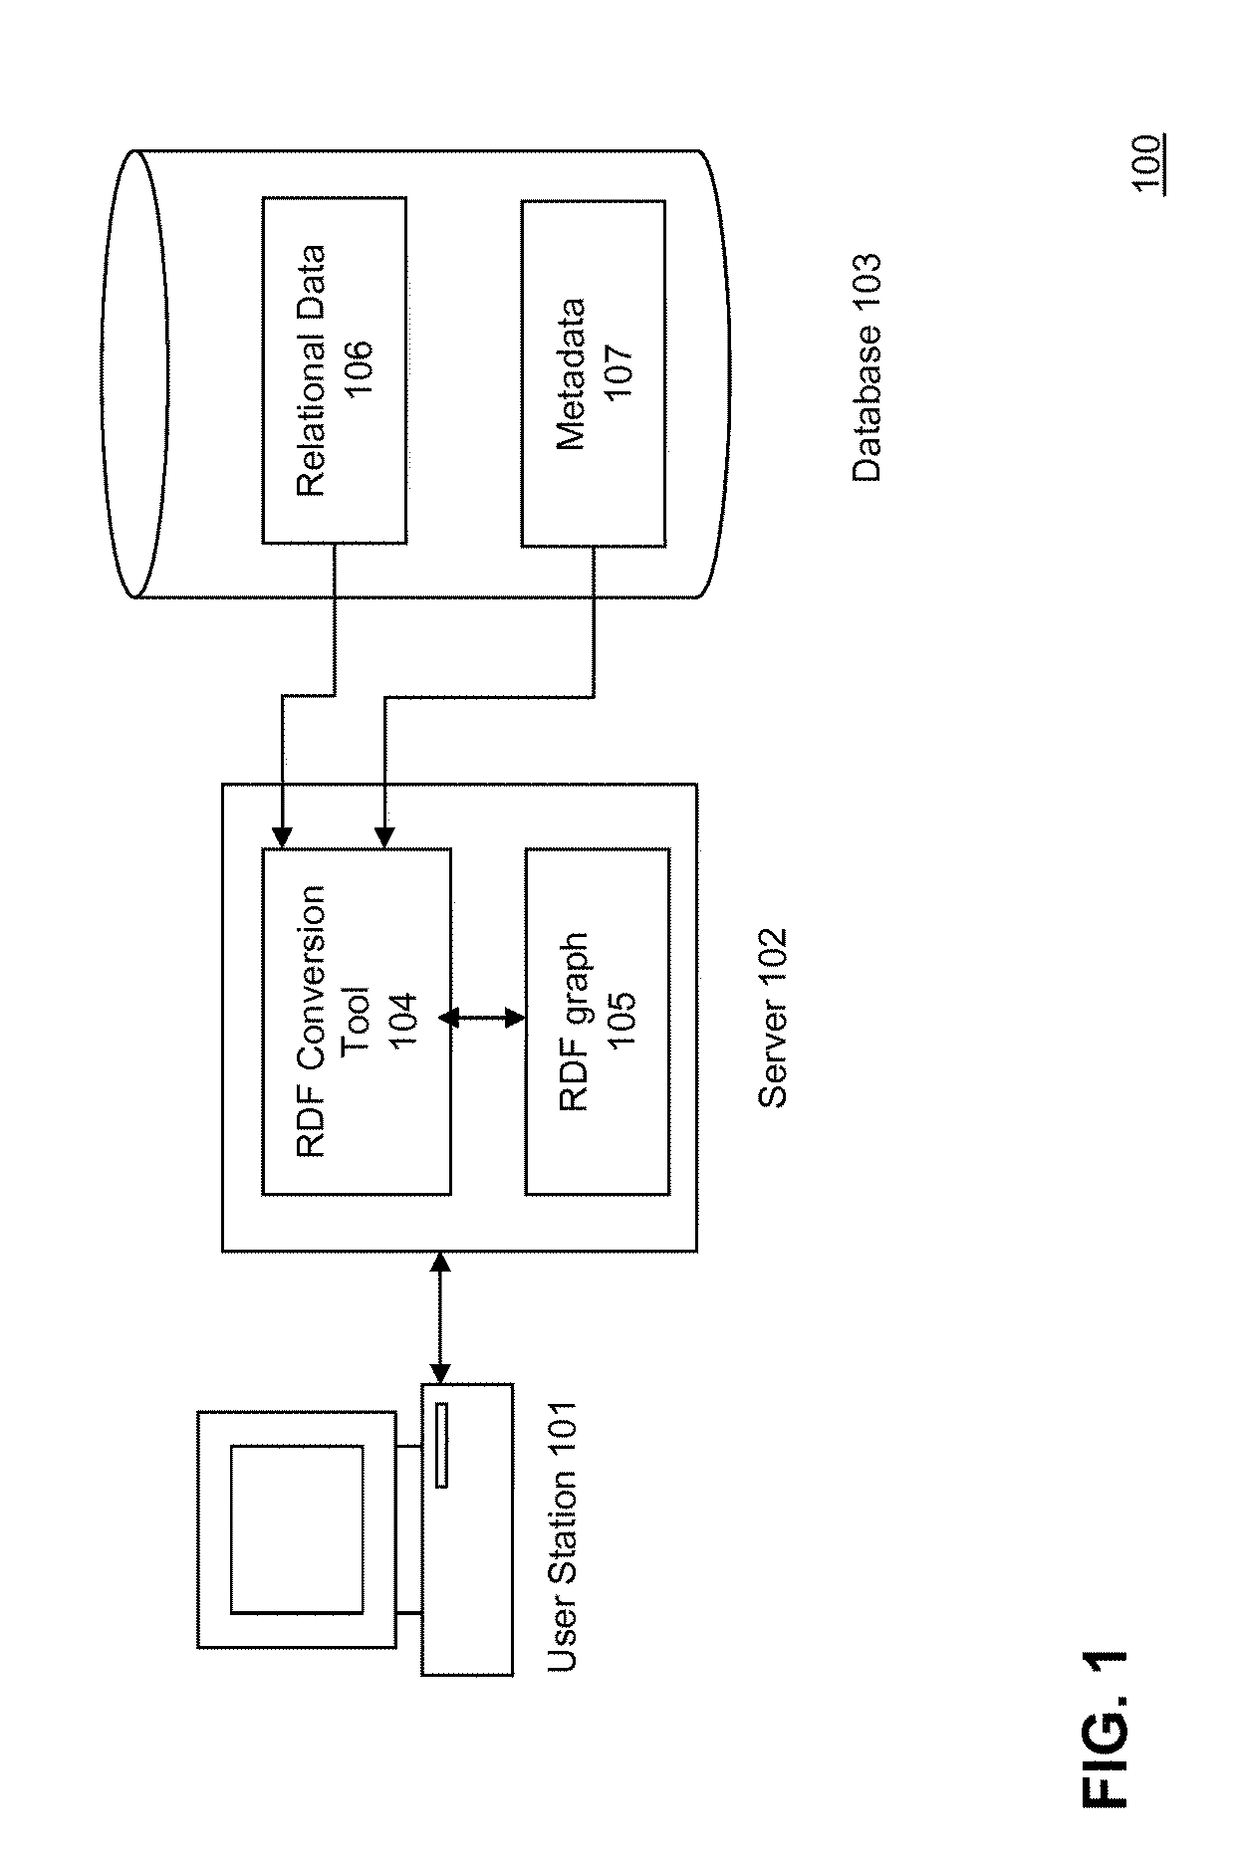 Method and system for visualizing relational data as RDF graphs with interactive response time